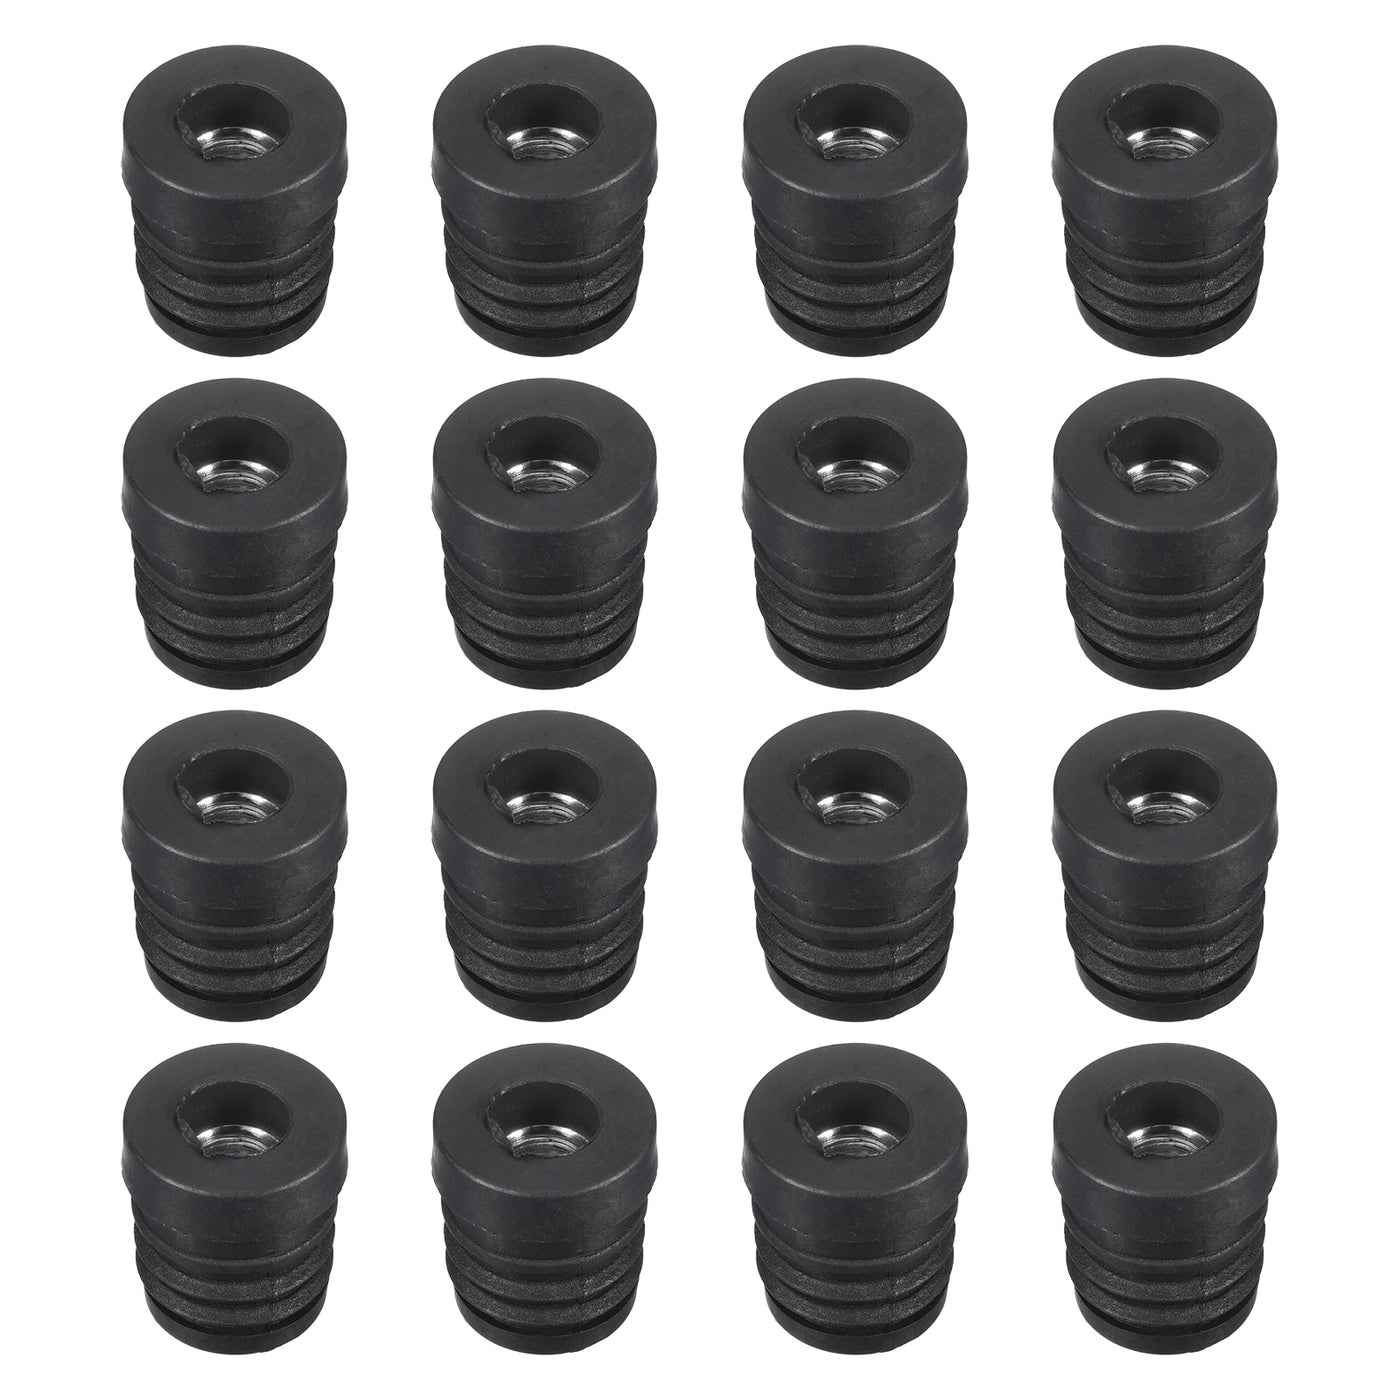 uxcell Uxcell 16Pcs 19mm/0.75" Caster Insert with Thread, Round M8 Thread for Furniture